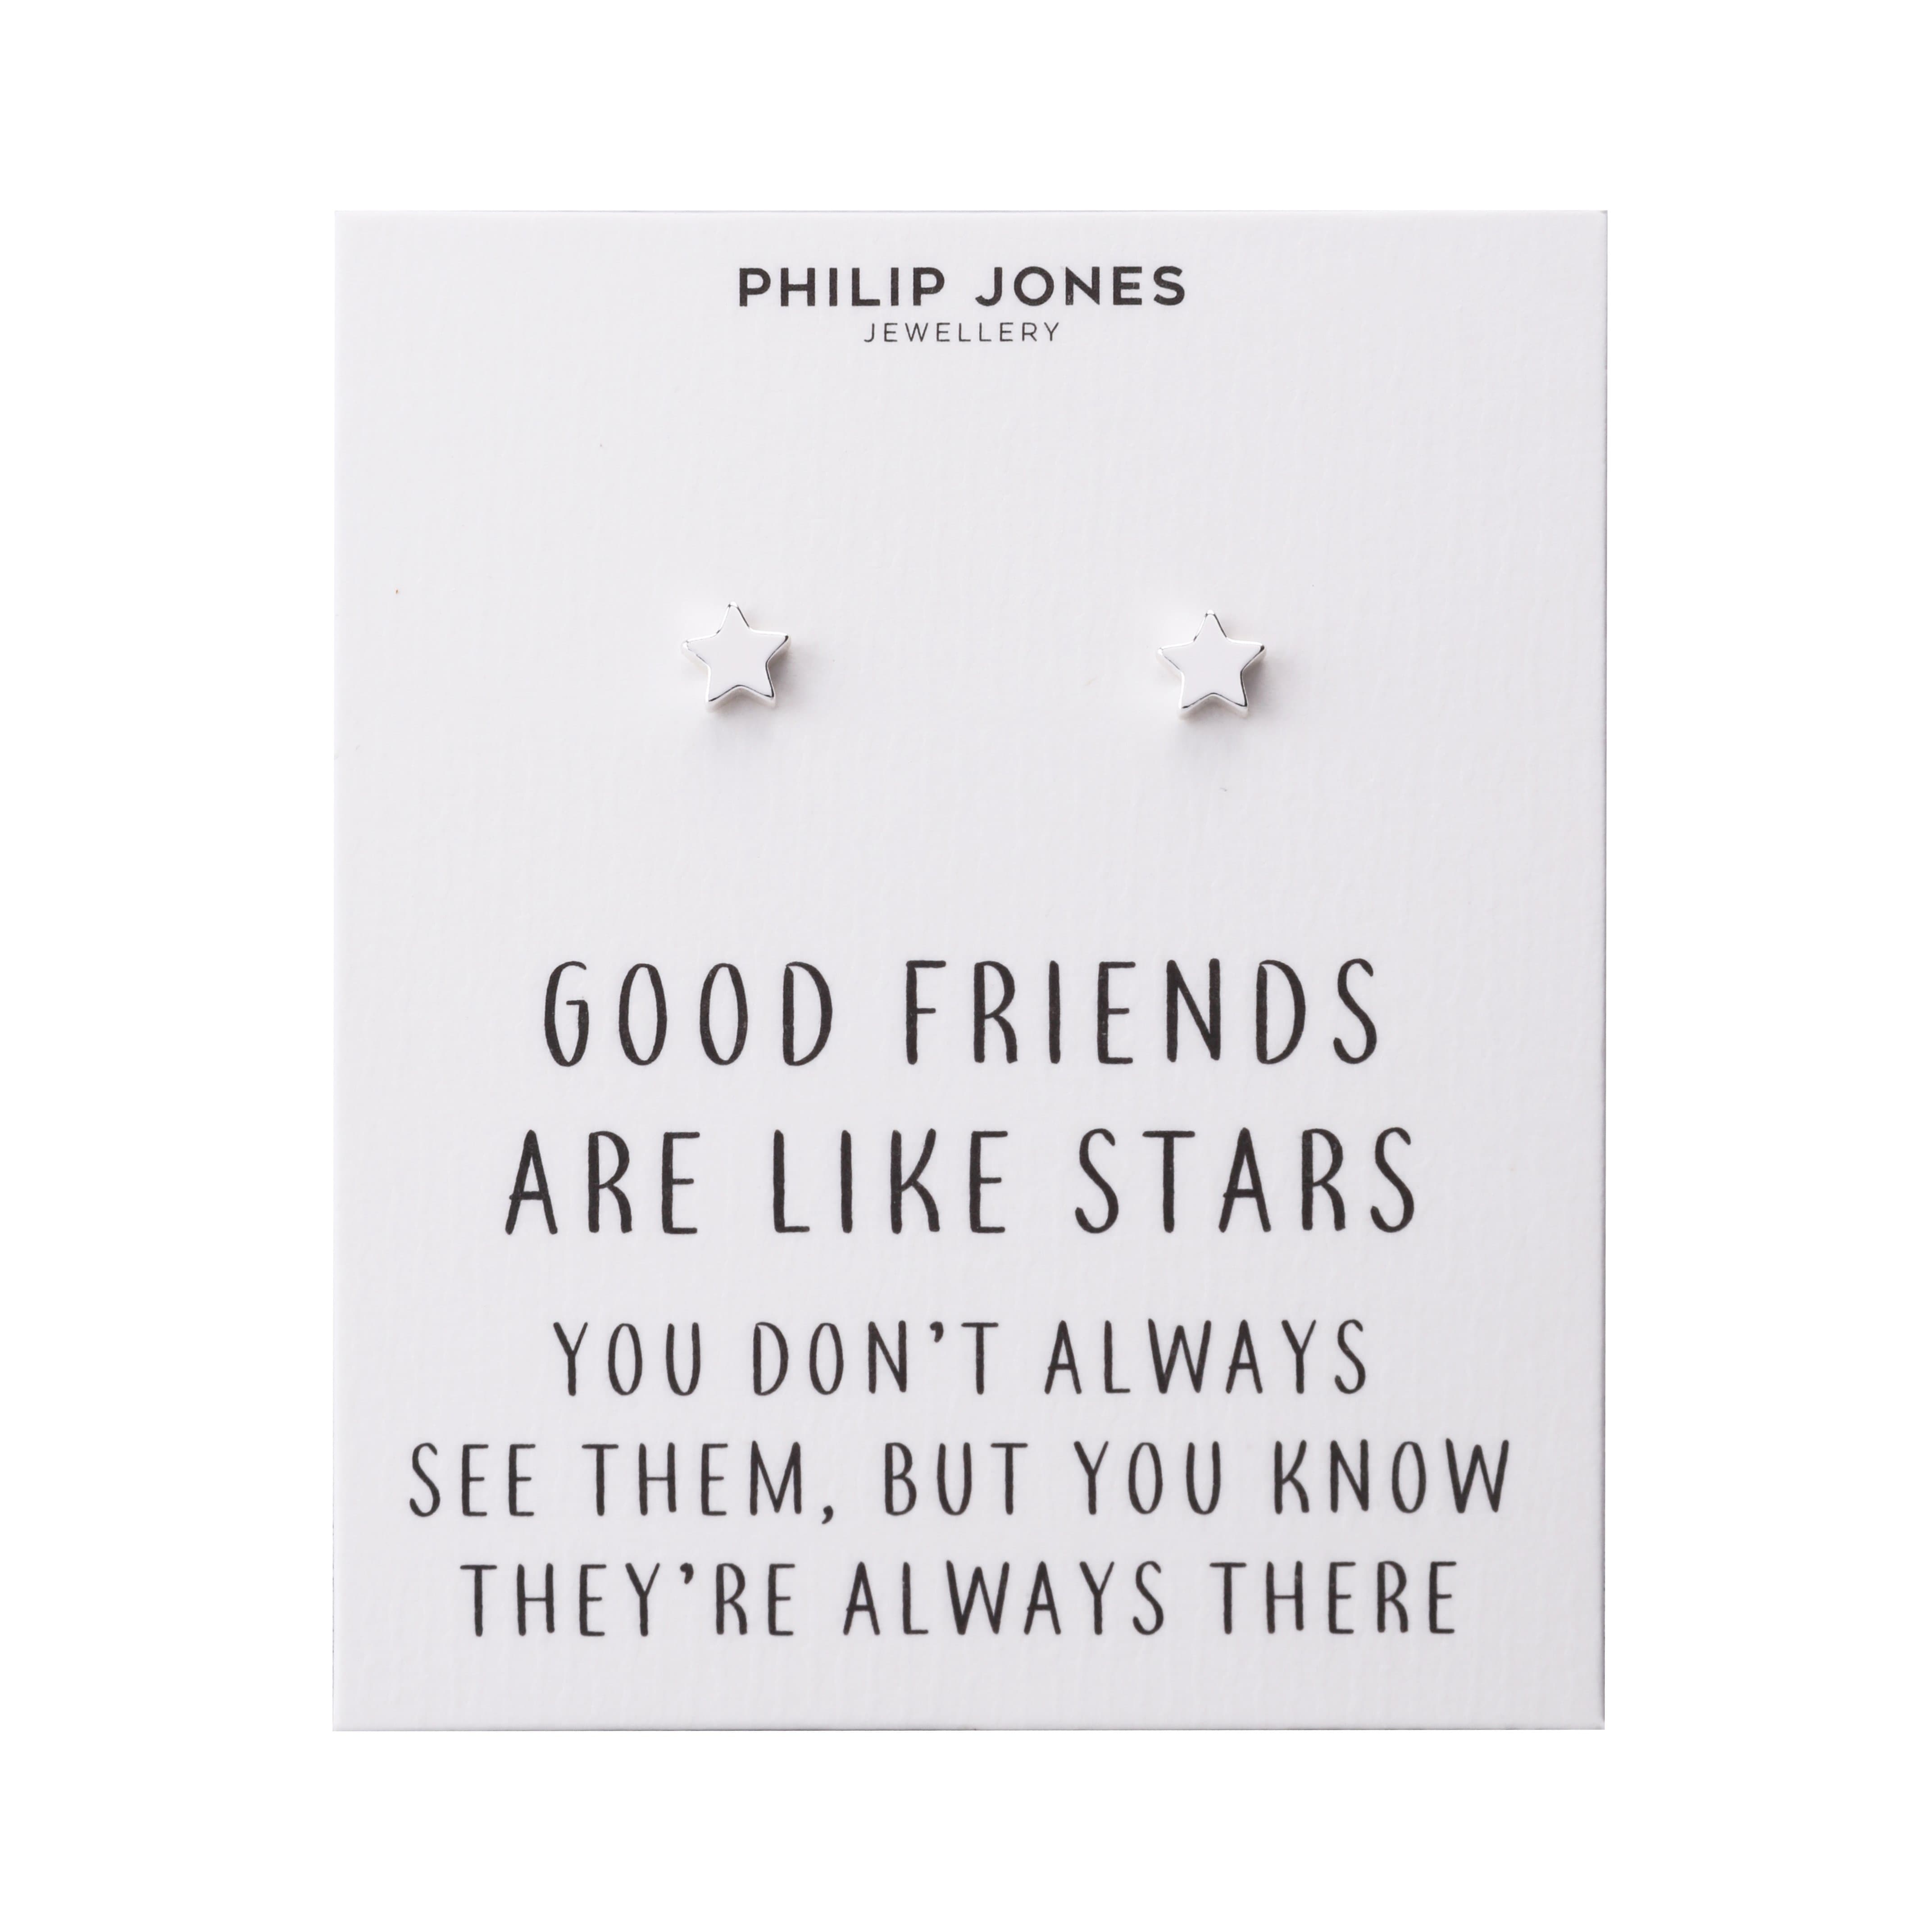 Silver Plated Star Stud Earrings with Quote Card by Philip Jones Jewellery